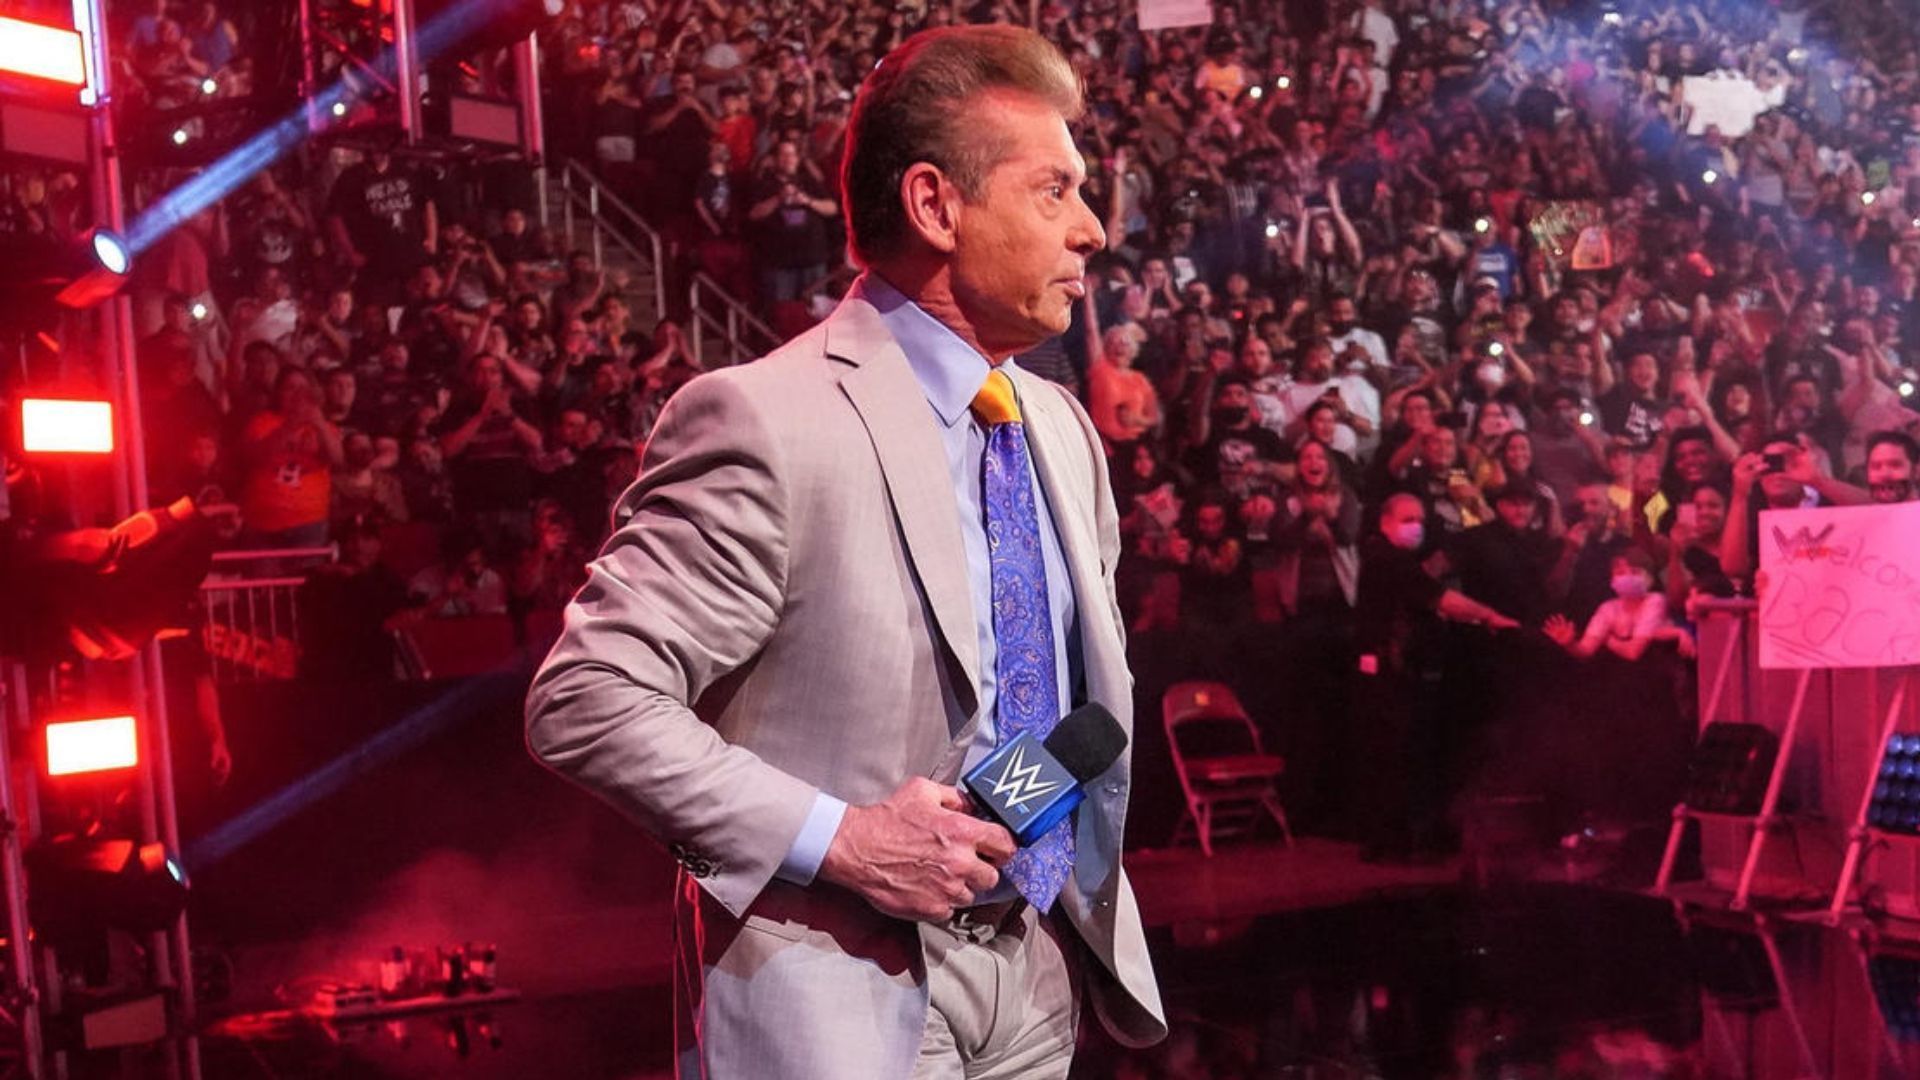 Vince McMahon has retired from WWE